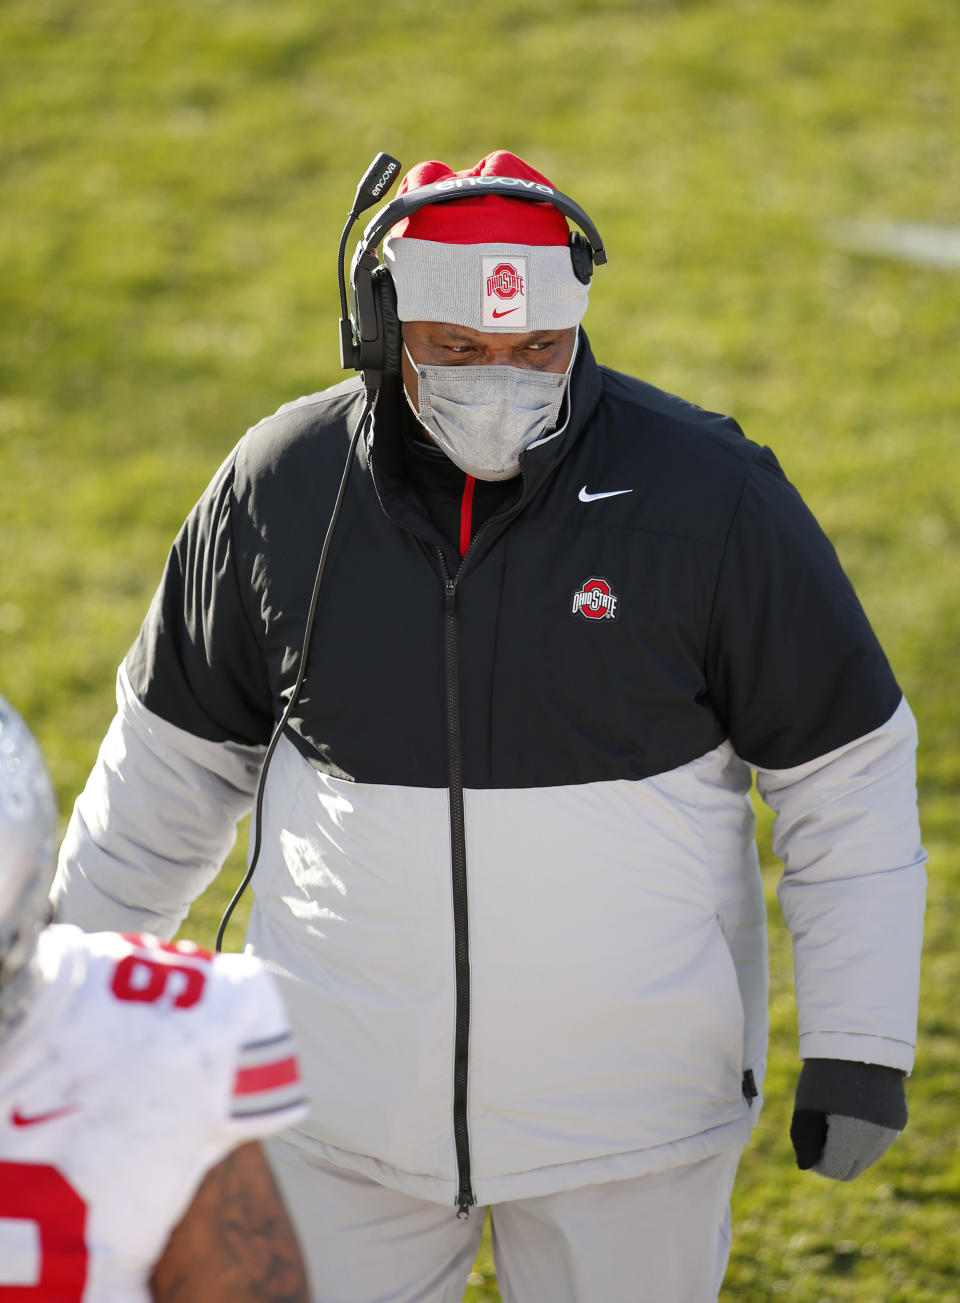 Ohio State interim head coach Larry Johnson looks on during the second half of an NCAA college football game against Michigan State, Saturday, Dec. 5, 2020, in East Lansing, Mich. (AP Photo/Al Goldis)